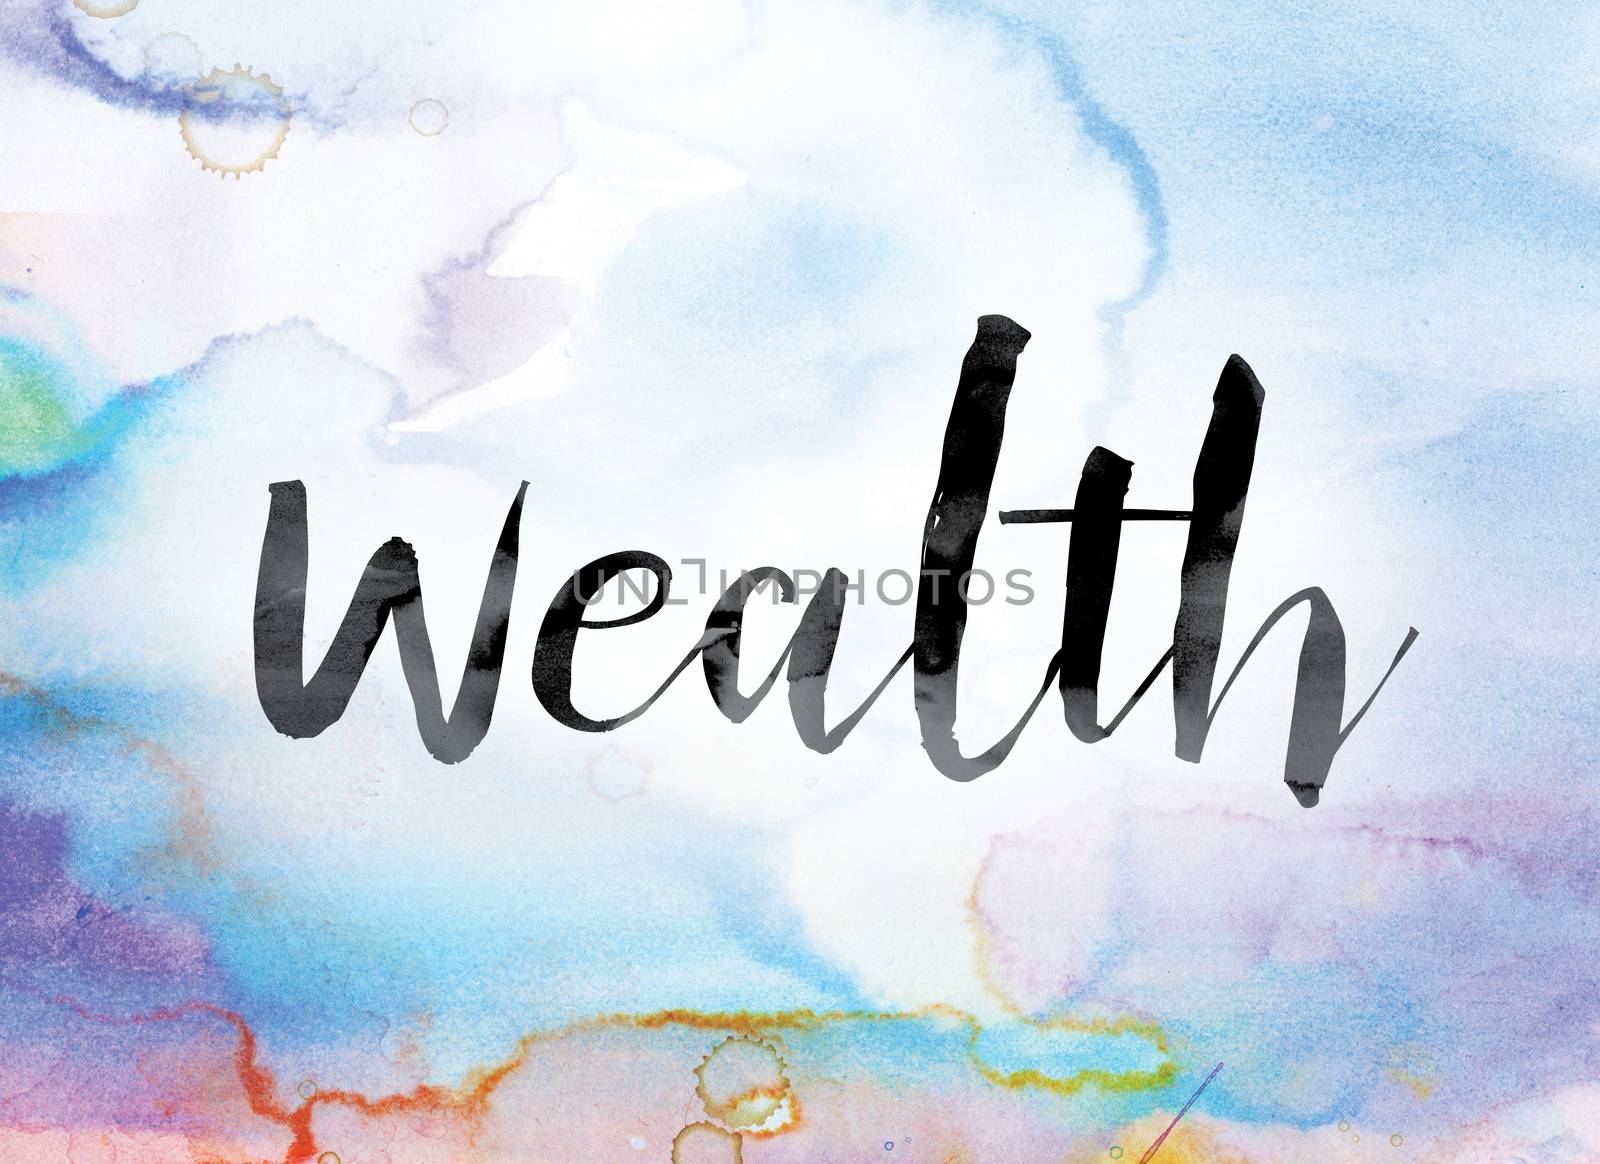 The word "Wealth" painted in black ink over a colorful watercolor washed background concept and theme.